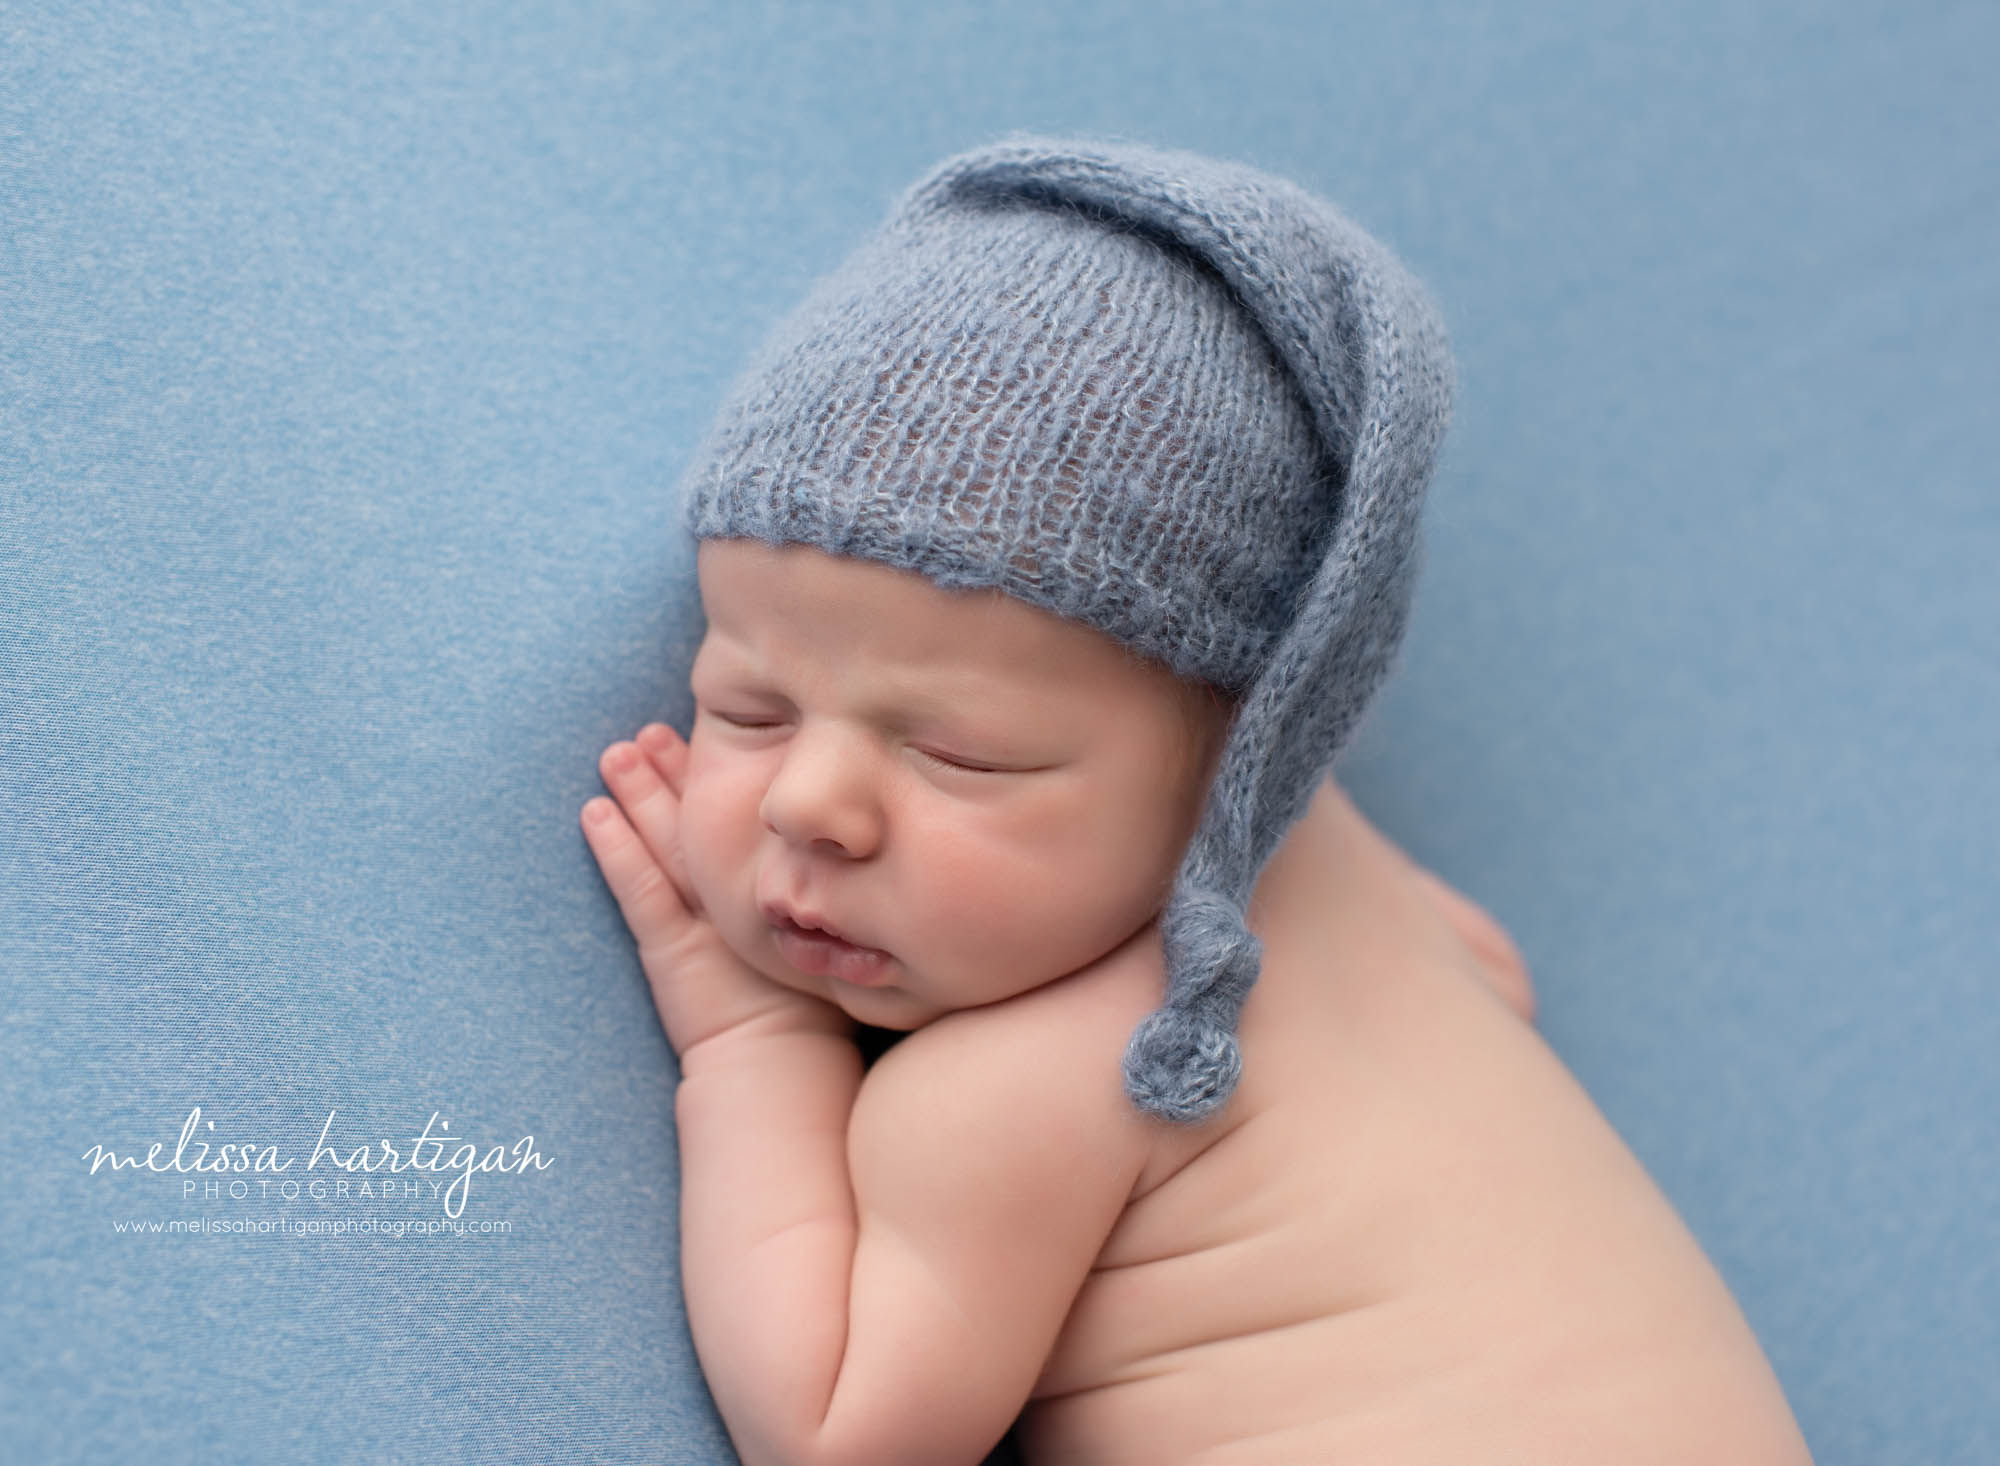 Newborn boy posed on blue backdrop with blue knitted sleepy cap